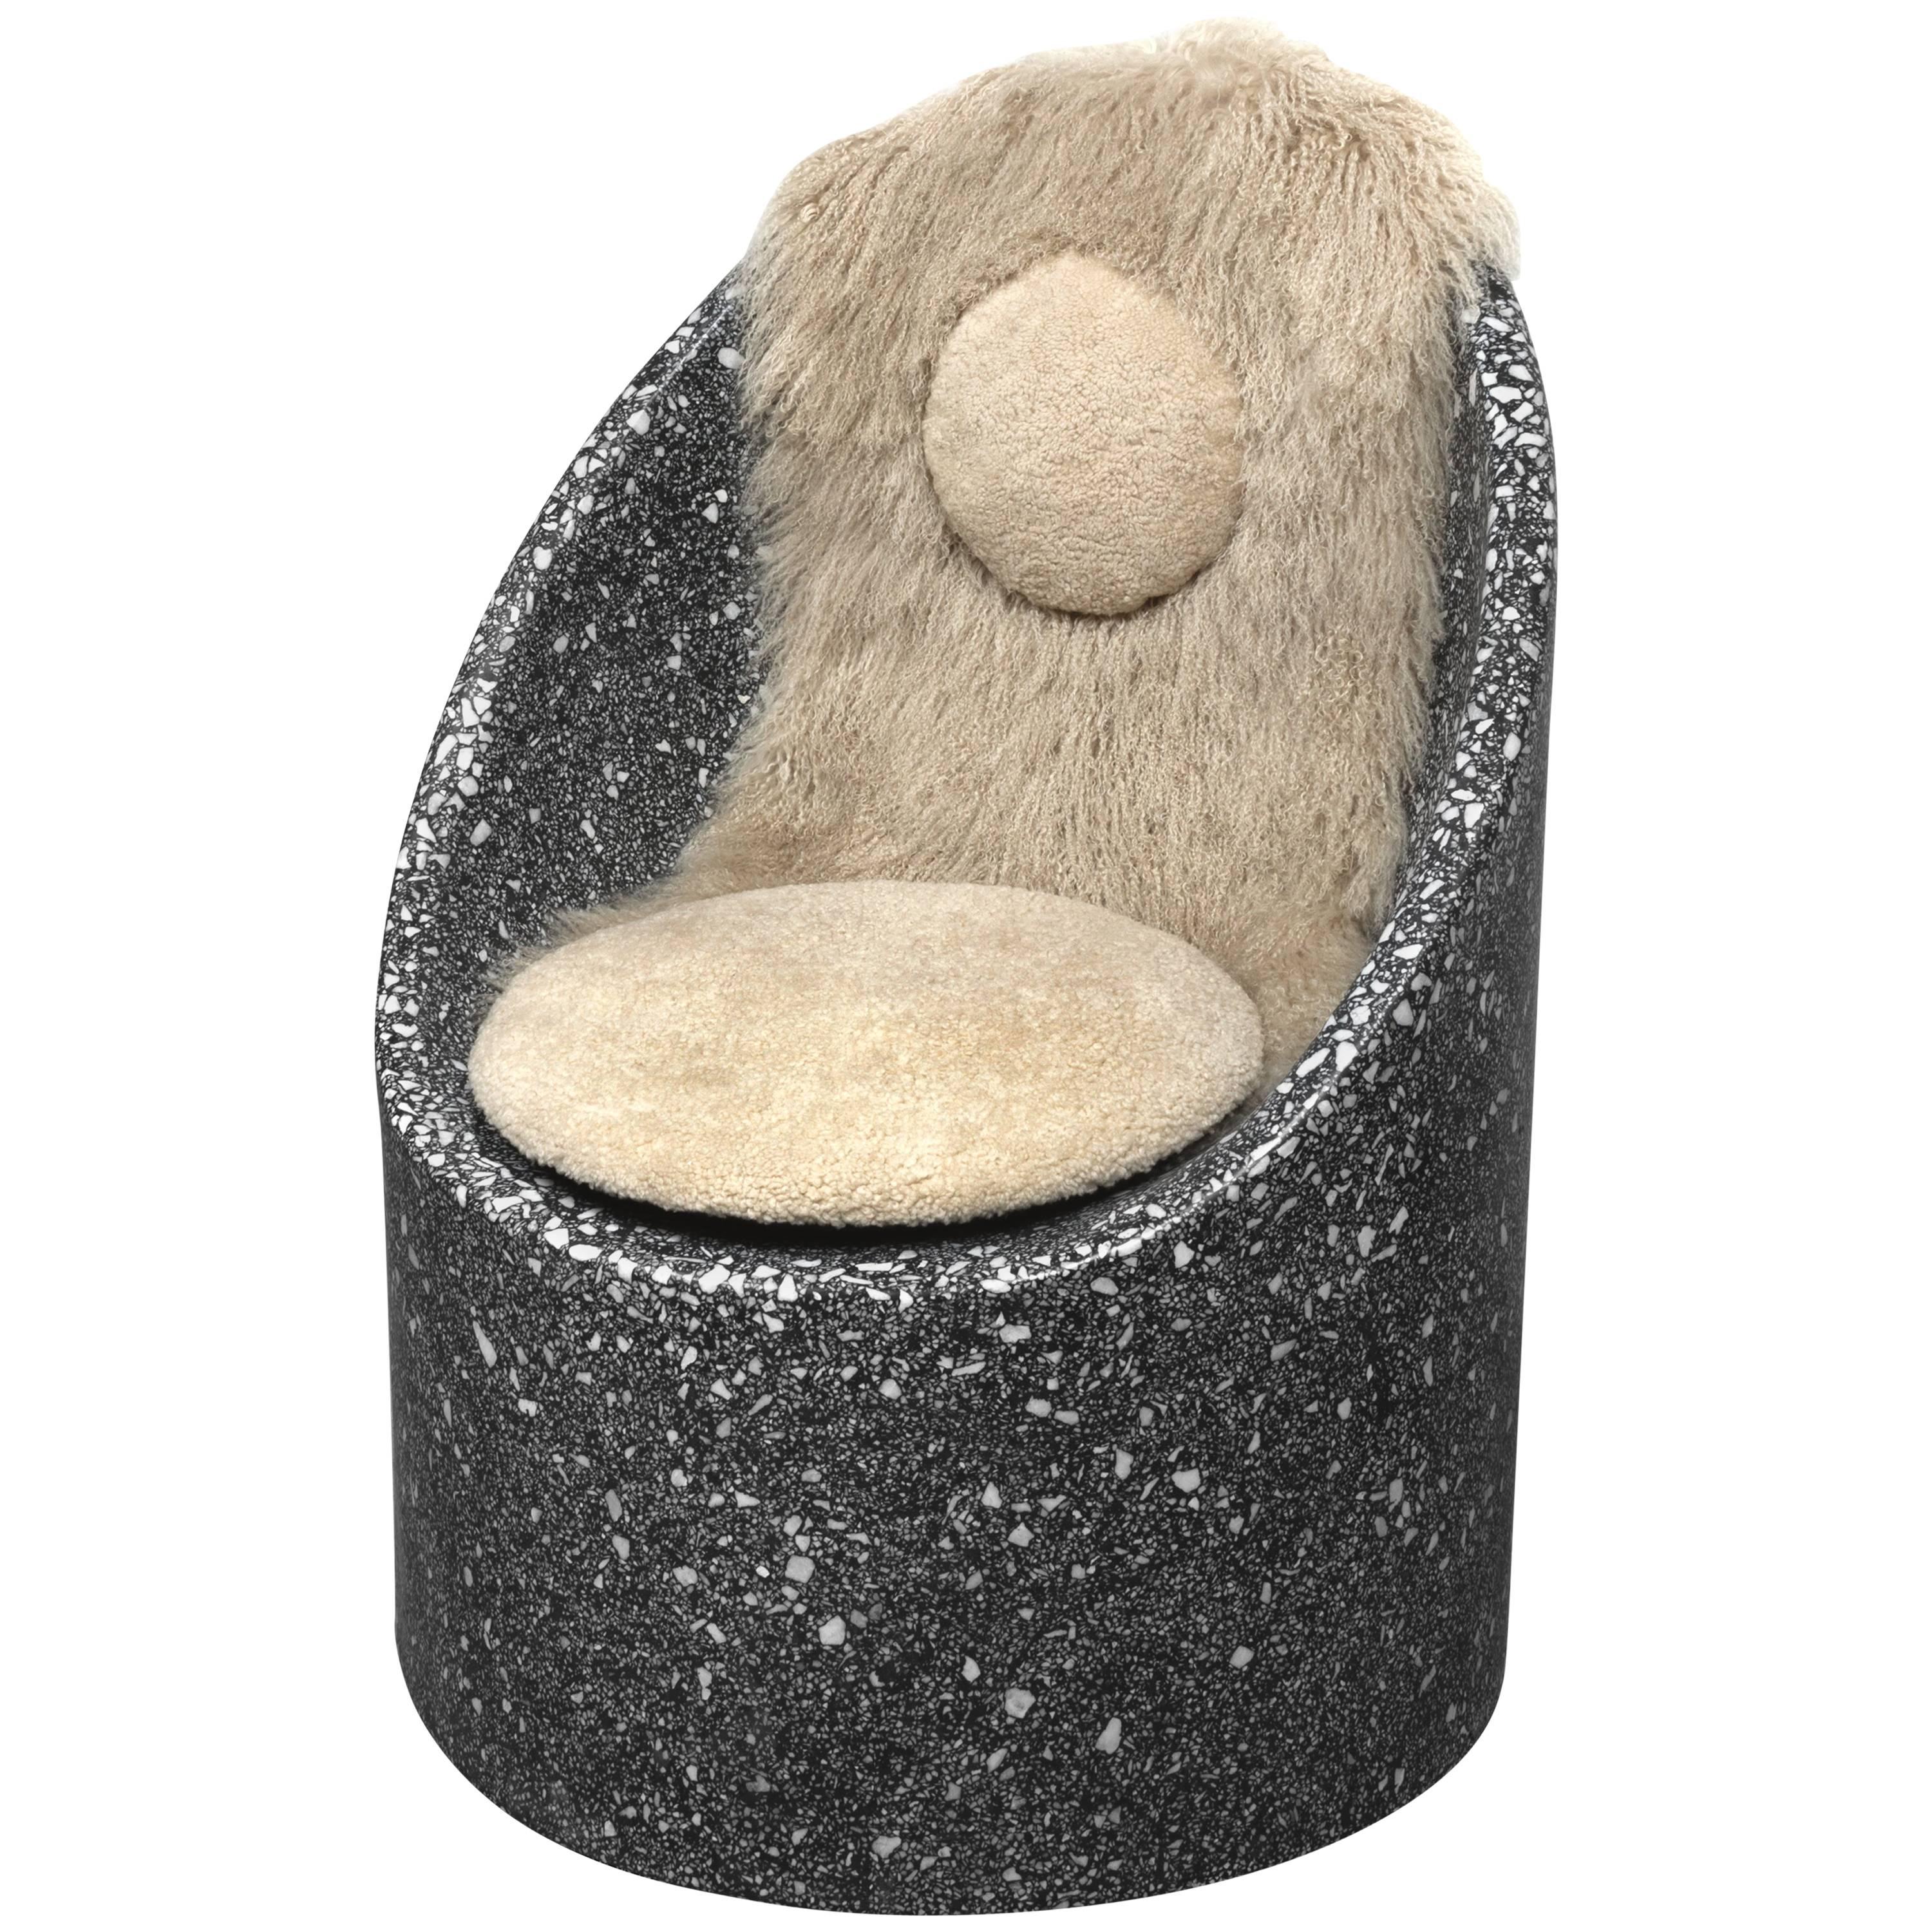 Sculptural Cozy Cave Chair in Black Cement/White Marble Terrazzo with Sheepskin For Sale